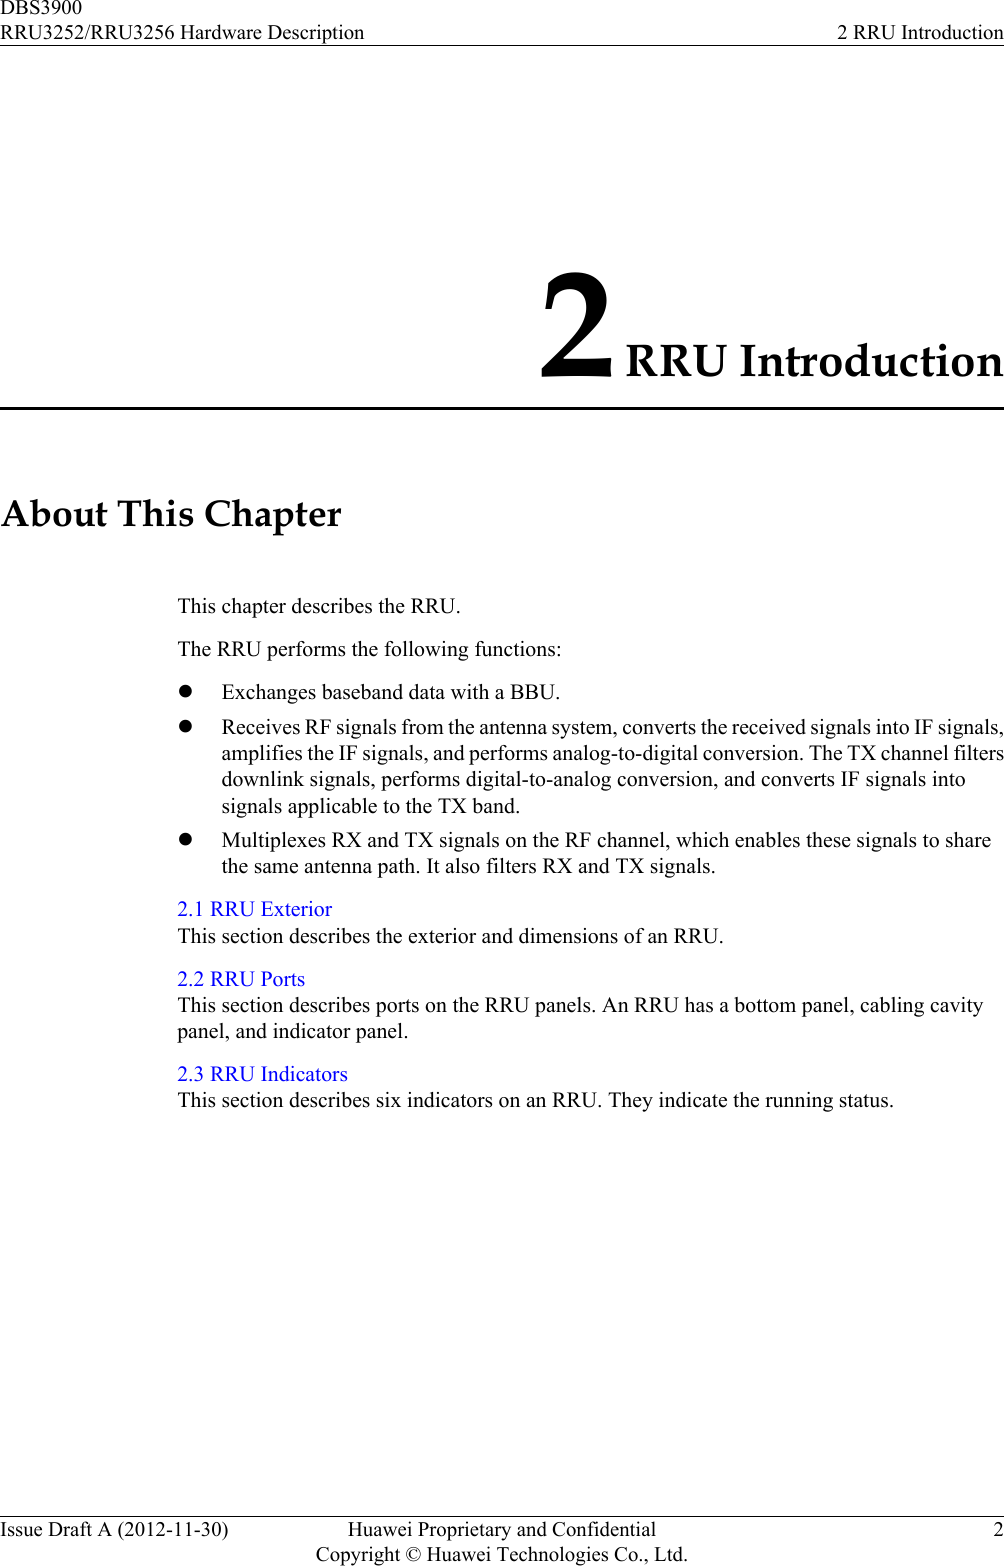 2 RRU IntroductionAbout This ChapterThis chapter describes the RRU.The RRU performs the following functions:lExchanges baseband data with a BBU.lReceives RF signals from the antenna system, converts the received signals into IF signals,amplifies the IF signals, and performs analog-to-digital conversion. The TX channel filtersdownlink signals, performs digital-to-analog conversion, and converts IF signals intosignals applicable to the TX band.lMultiplexes RX and TX signals on the RF channel, which enables these signals to sharethe same antenna path. It also filters RX and TX signals.2.1 RRU ExteriorThis section describes the exterior and dimensions of an RRU.2.2 RRU PortsThis section describes ports on the RRU panels. An RRU has a bottom panel, cabling cavitypanel, and indicator panel.2.3 RRU IndicatorsThis section describes six indicators on an RRU. They indicate the running status.DBS3900RRU3252/RRU3256 Hardware Description 2 RRU IntroductionIssue Draft A (2012-11-30) Huawei Proprietary and ConfidentialCopyright © Huawei Technologies Co., Ltd.2